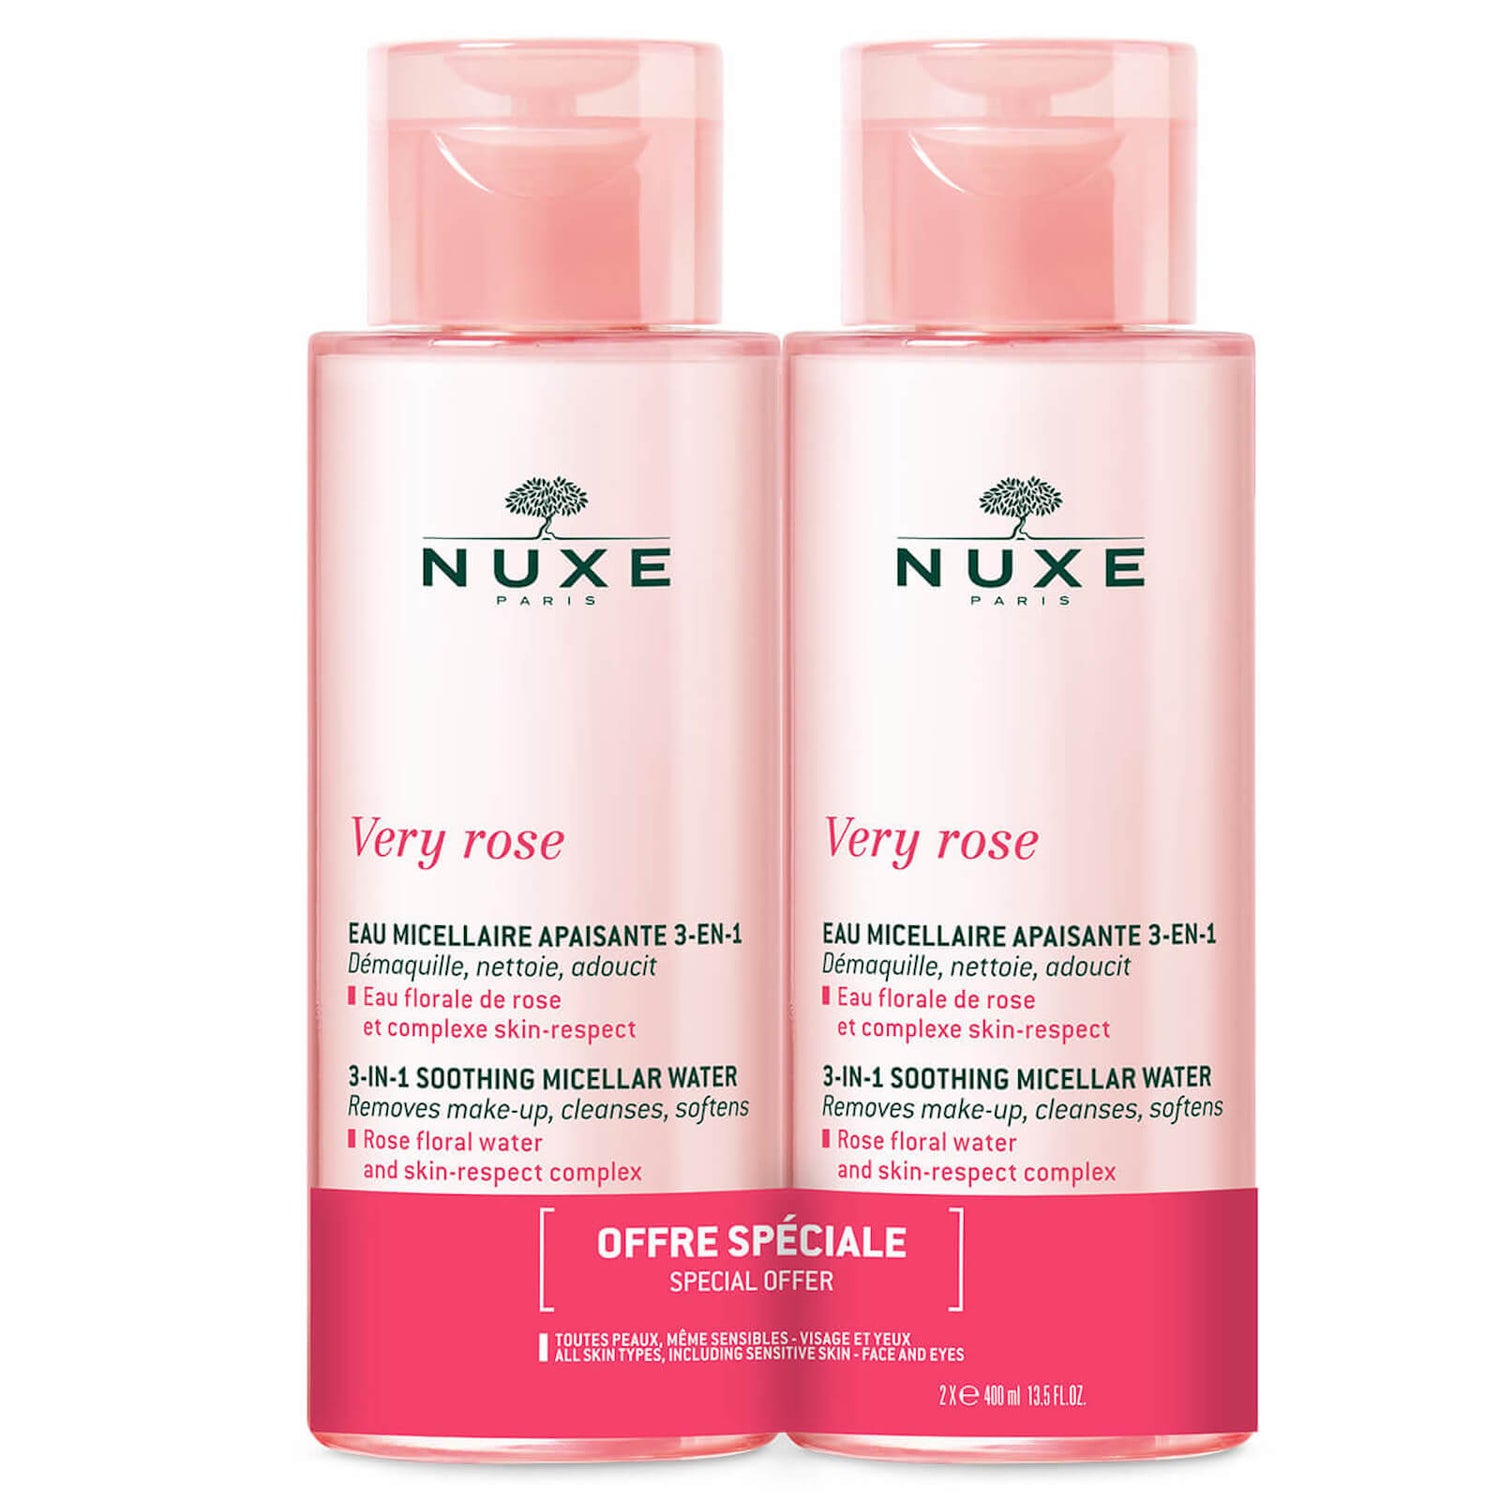 NUXE Very Rose 3-in-1 Soothing Micellar Water Duo 2 x 400ml